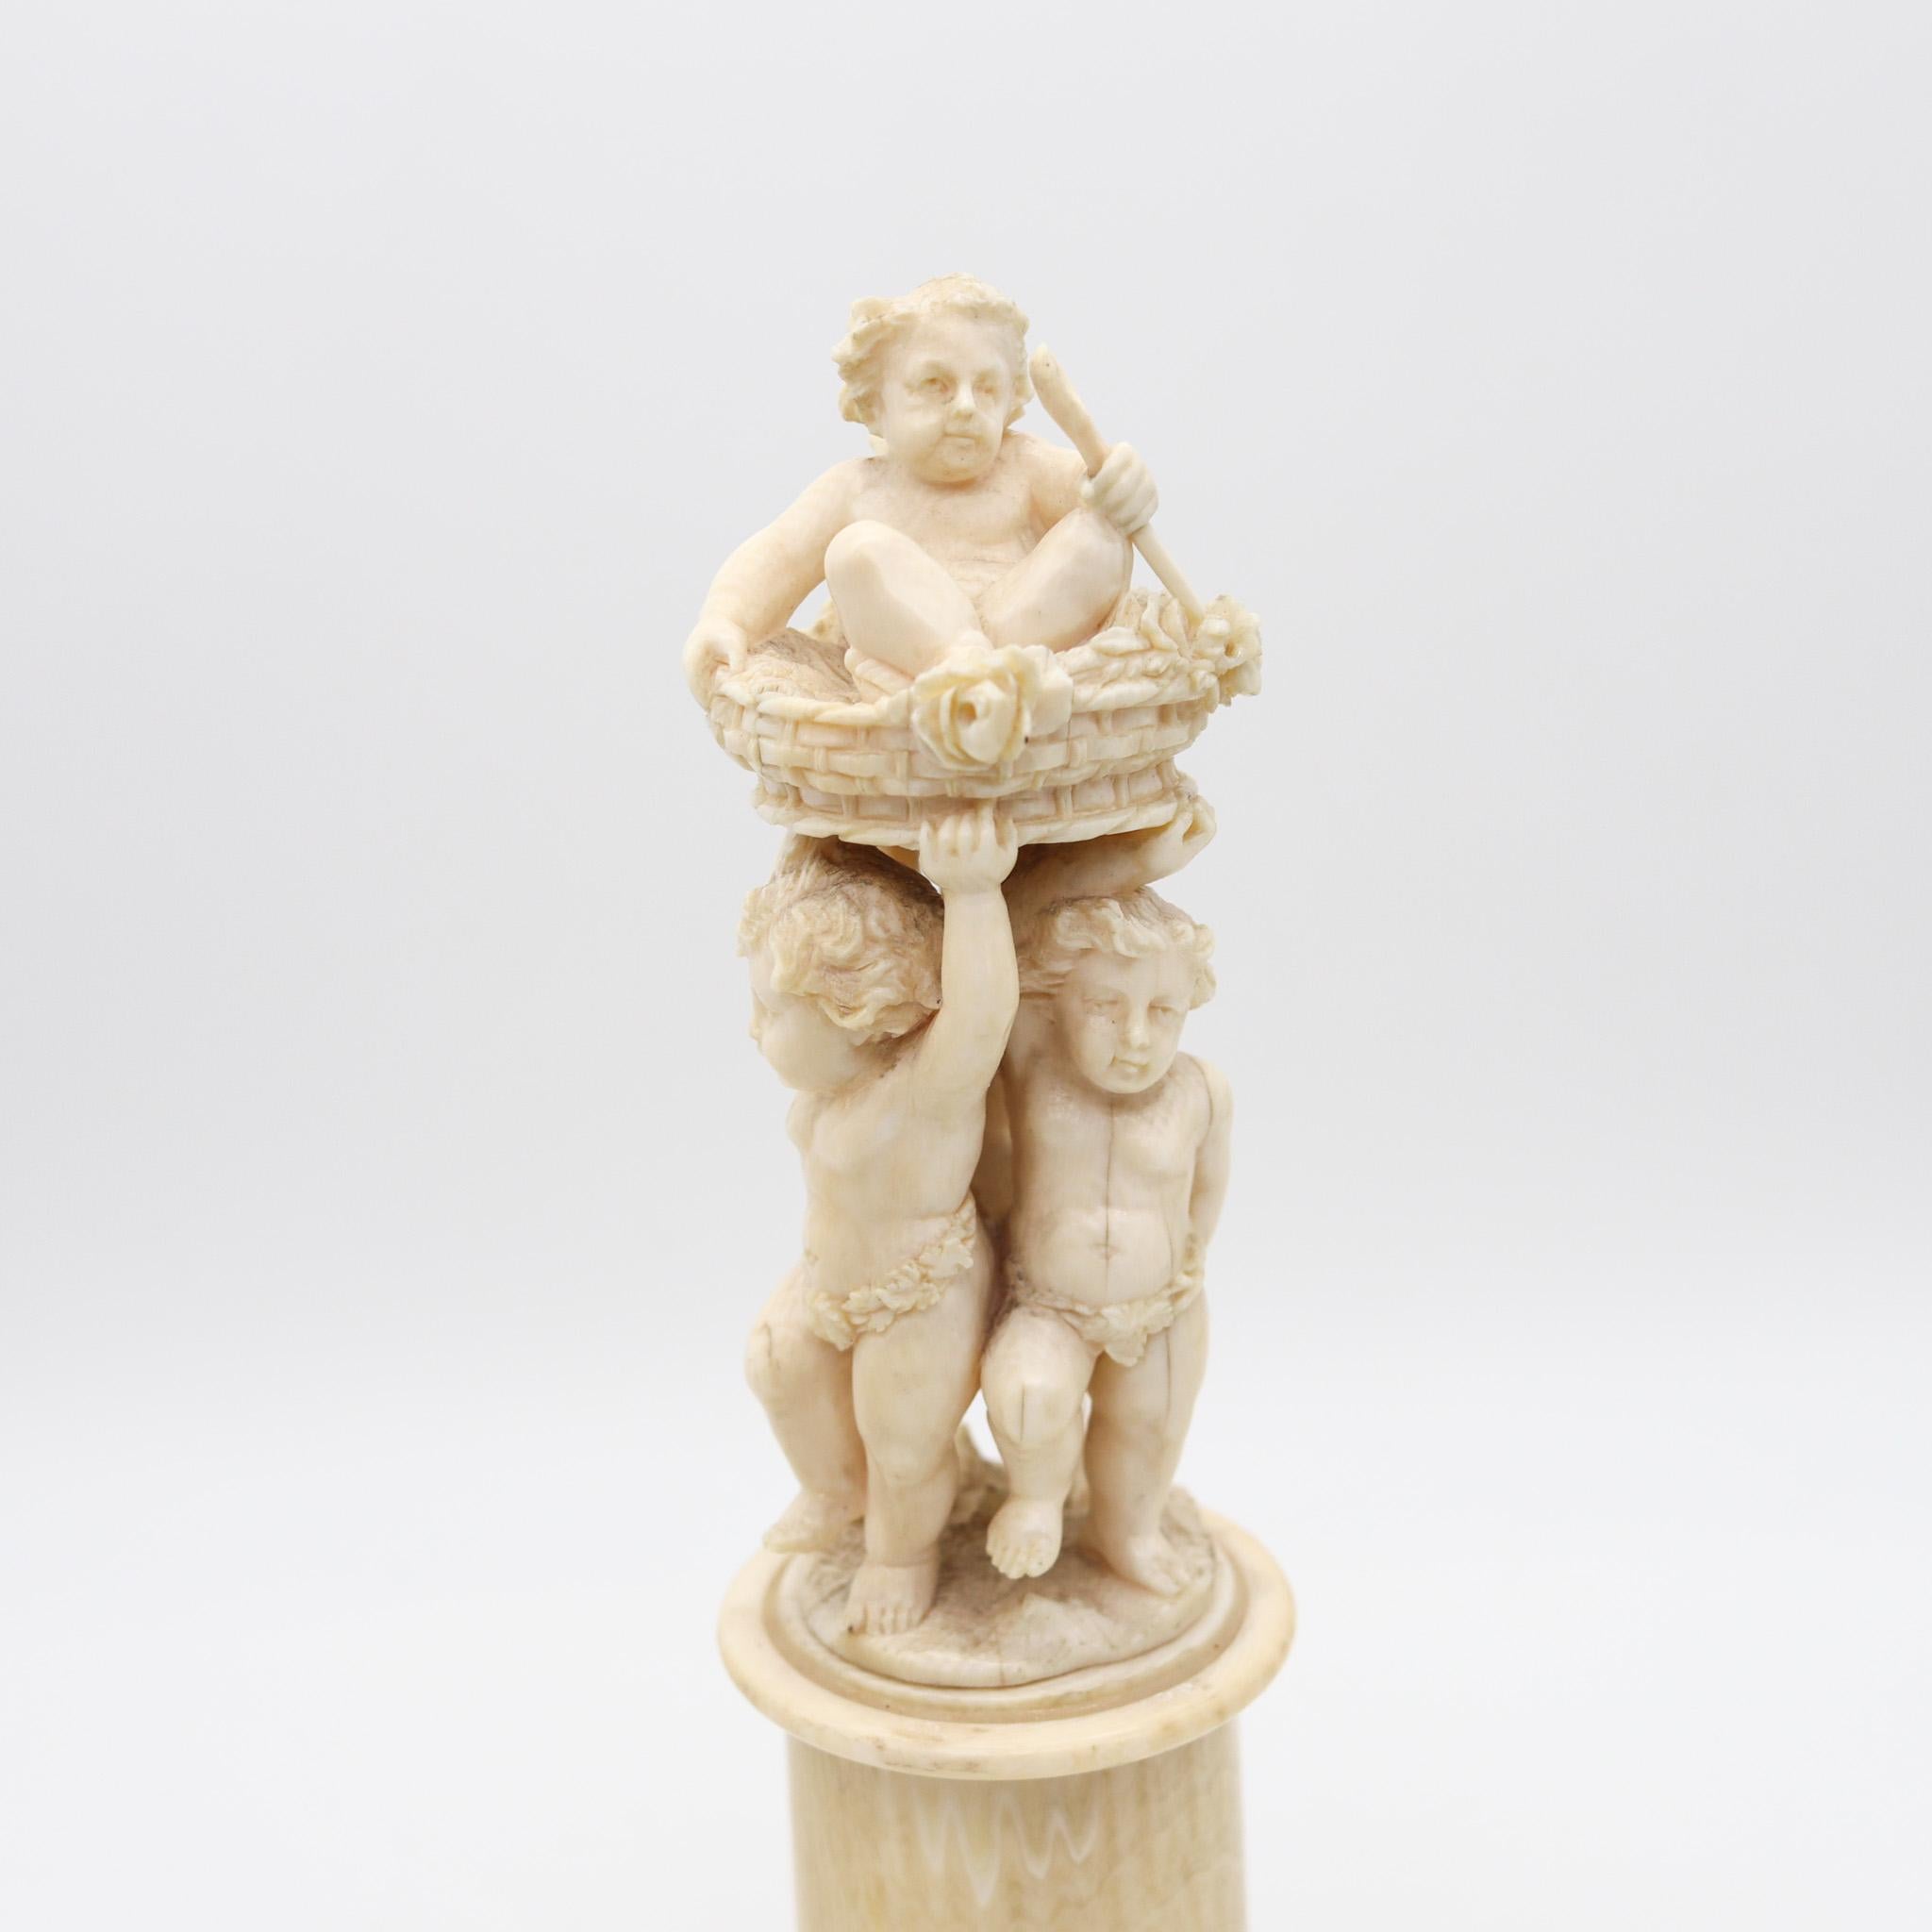 An Italian desk box with the triumph of Bacchus.

Beautiful carved antique piece, created in Italy during the 19th century, circa 1850. This is a desk box been made in the shape of a trophy, depicting the triumph of Bacchus. The rare cylindrical box